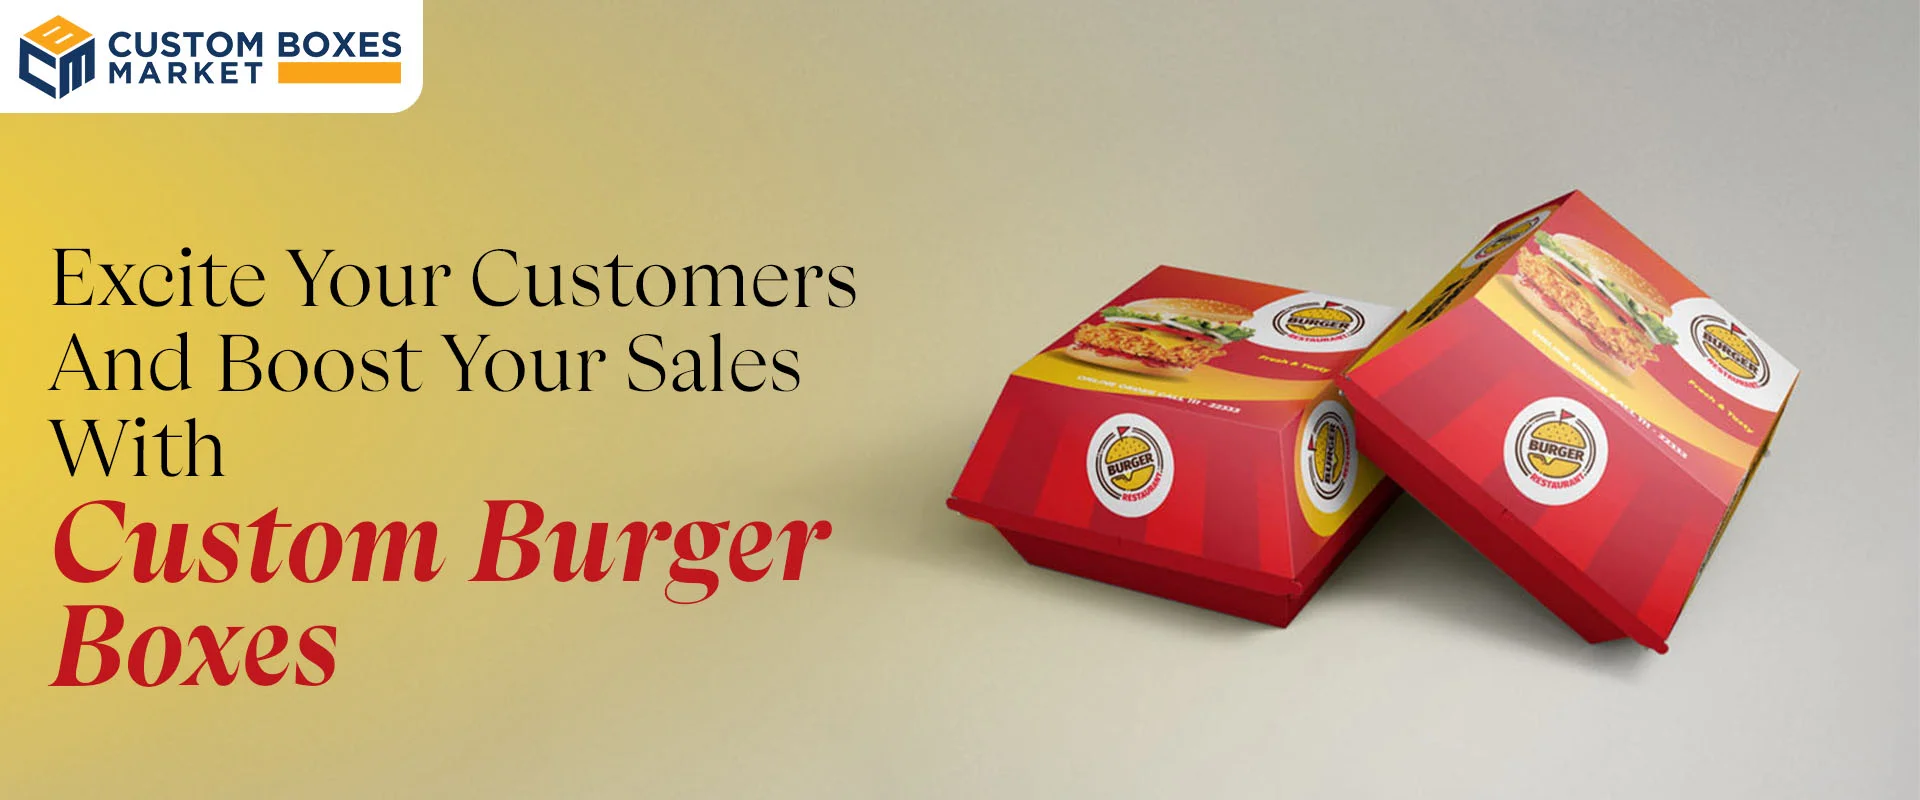 Excite Your Customers And Boost Your Sales With Custom Burger Boxes